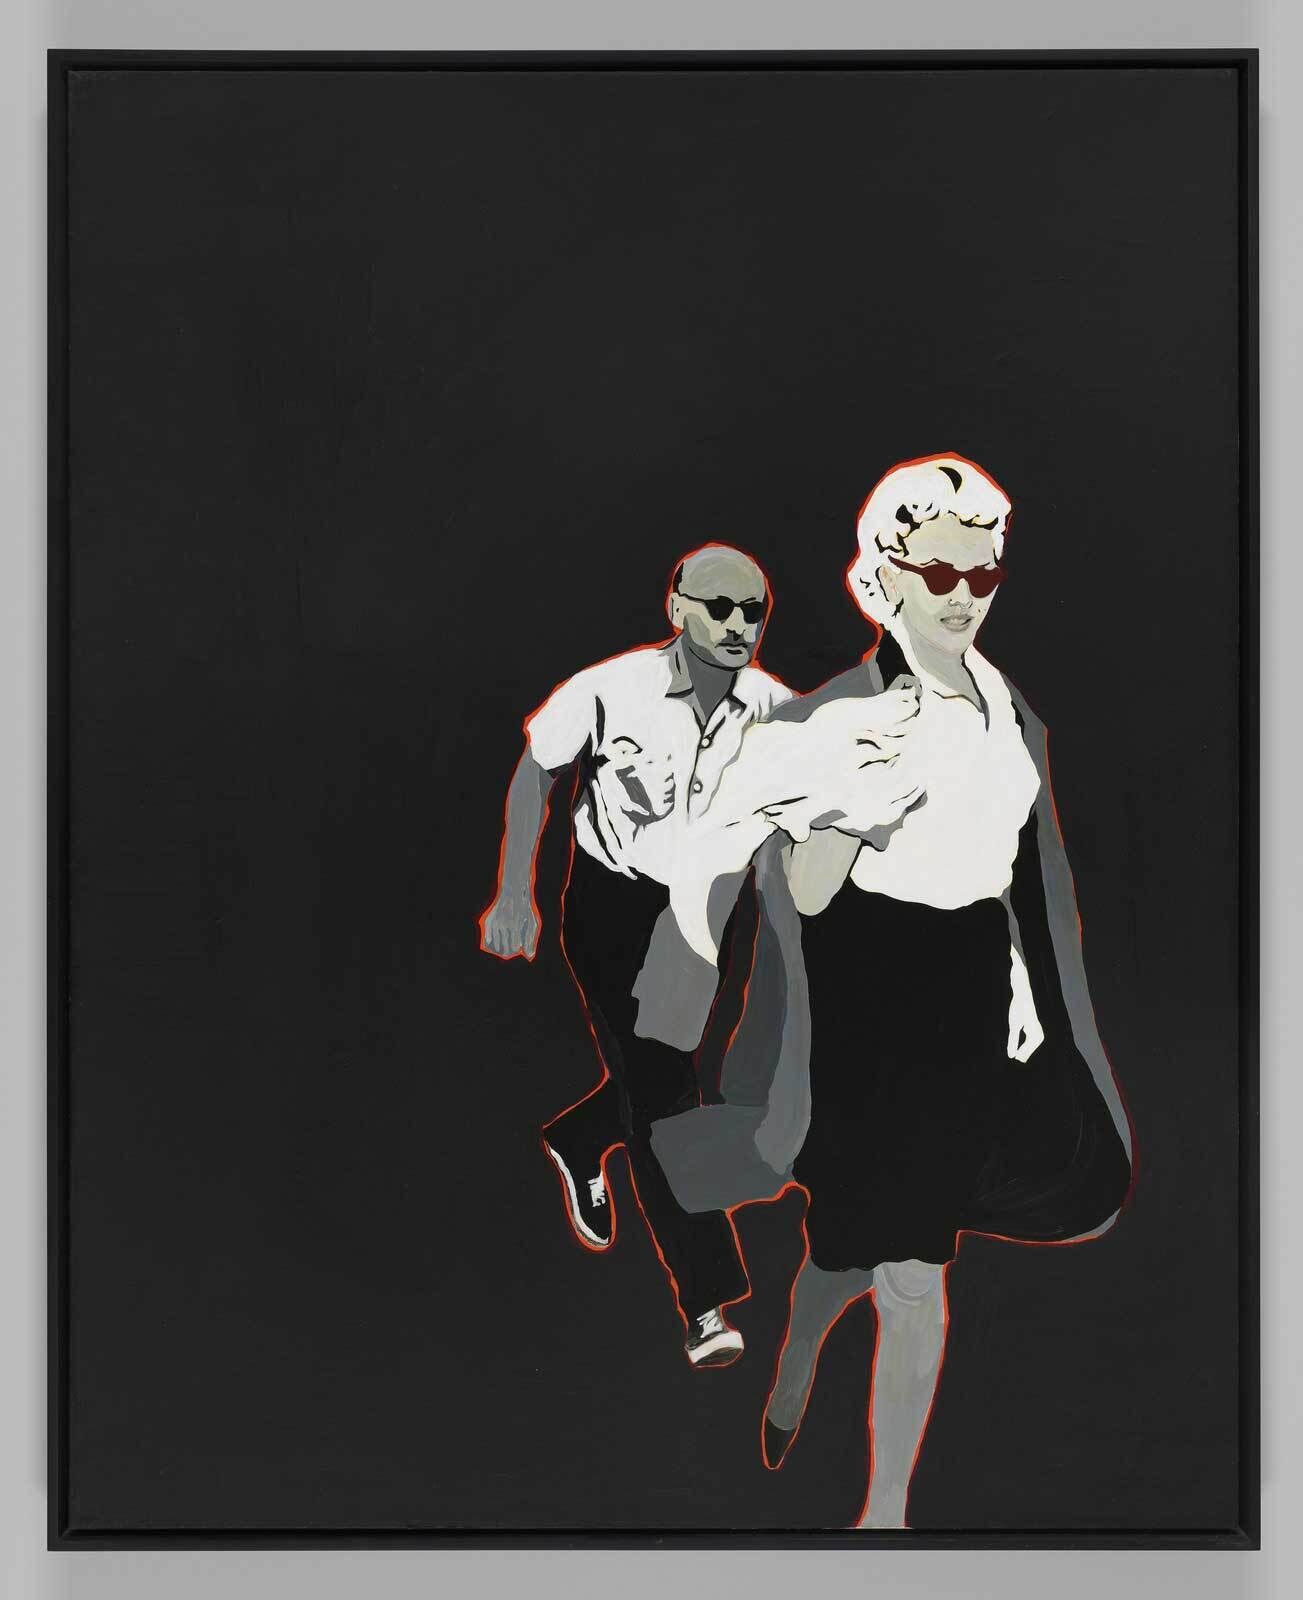 A simplified black and white figure of Marilyn Monroe running emerges from a flat black background, outlined in a thin red line . Just behind her, is the running figure of a bald man wearing sunglasses. 